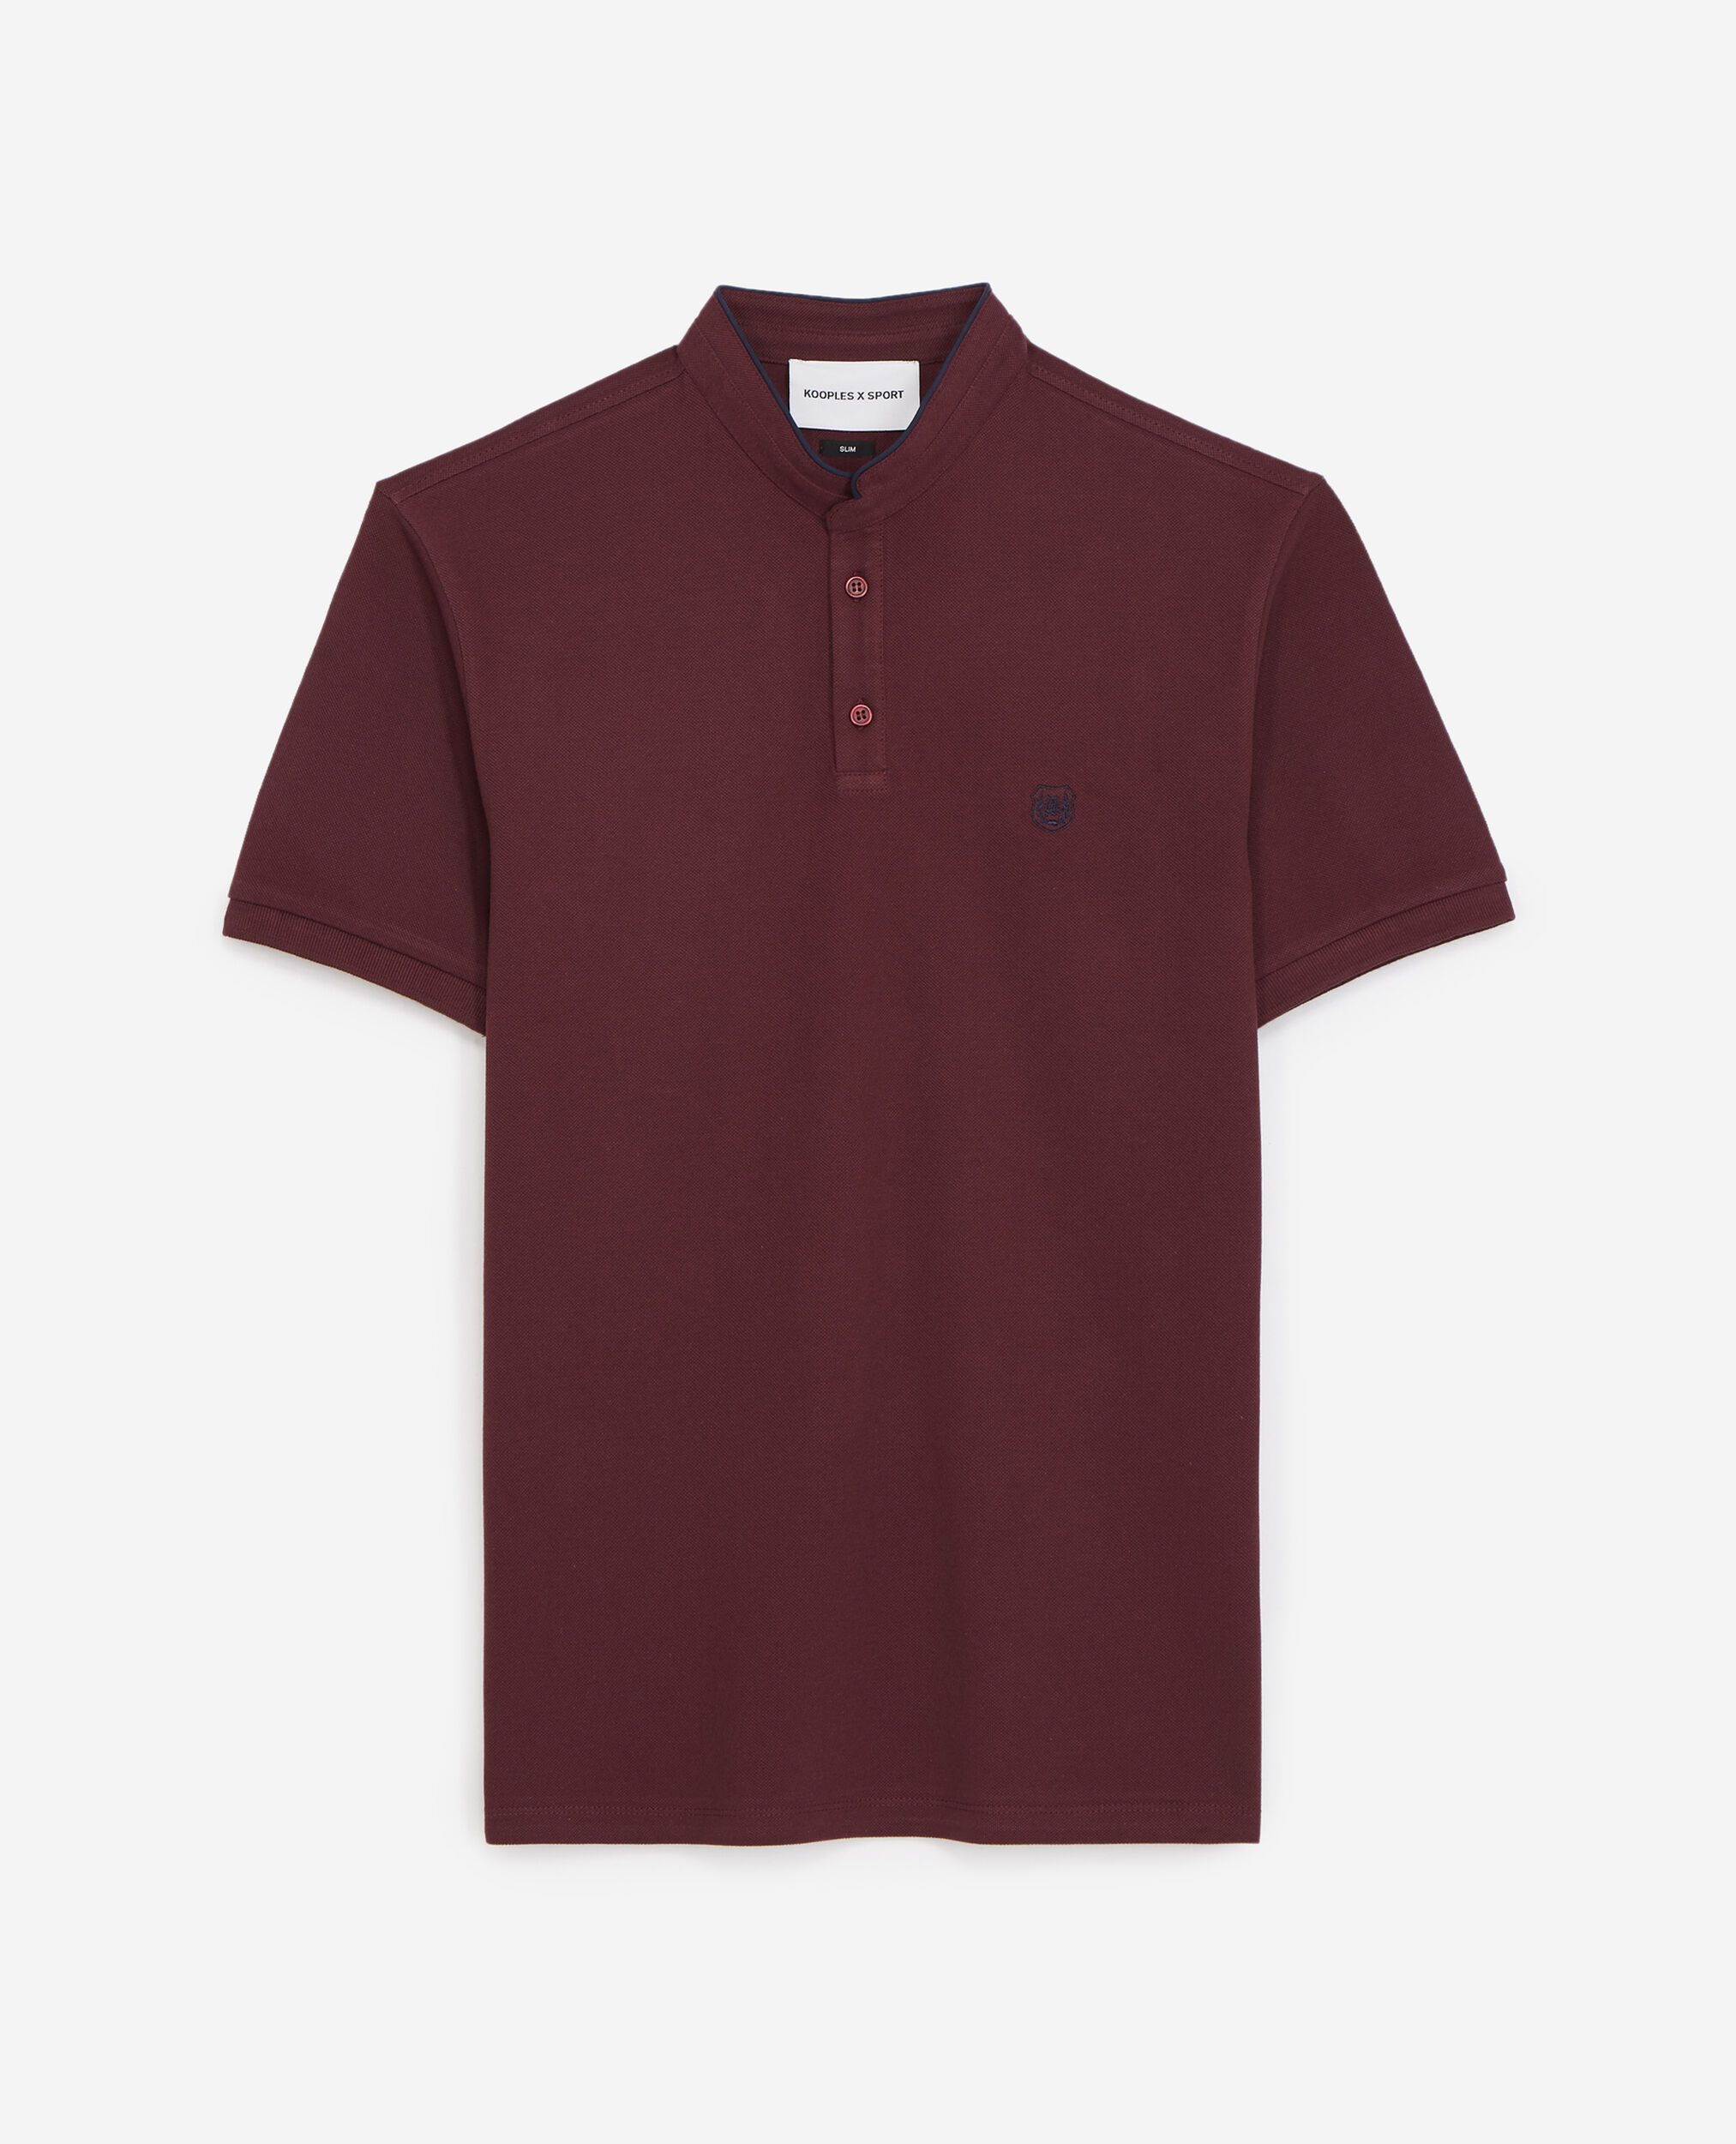 Polo marron, CHOCO TRUFFL / NIGHT BLUE, hi-res image number null